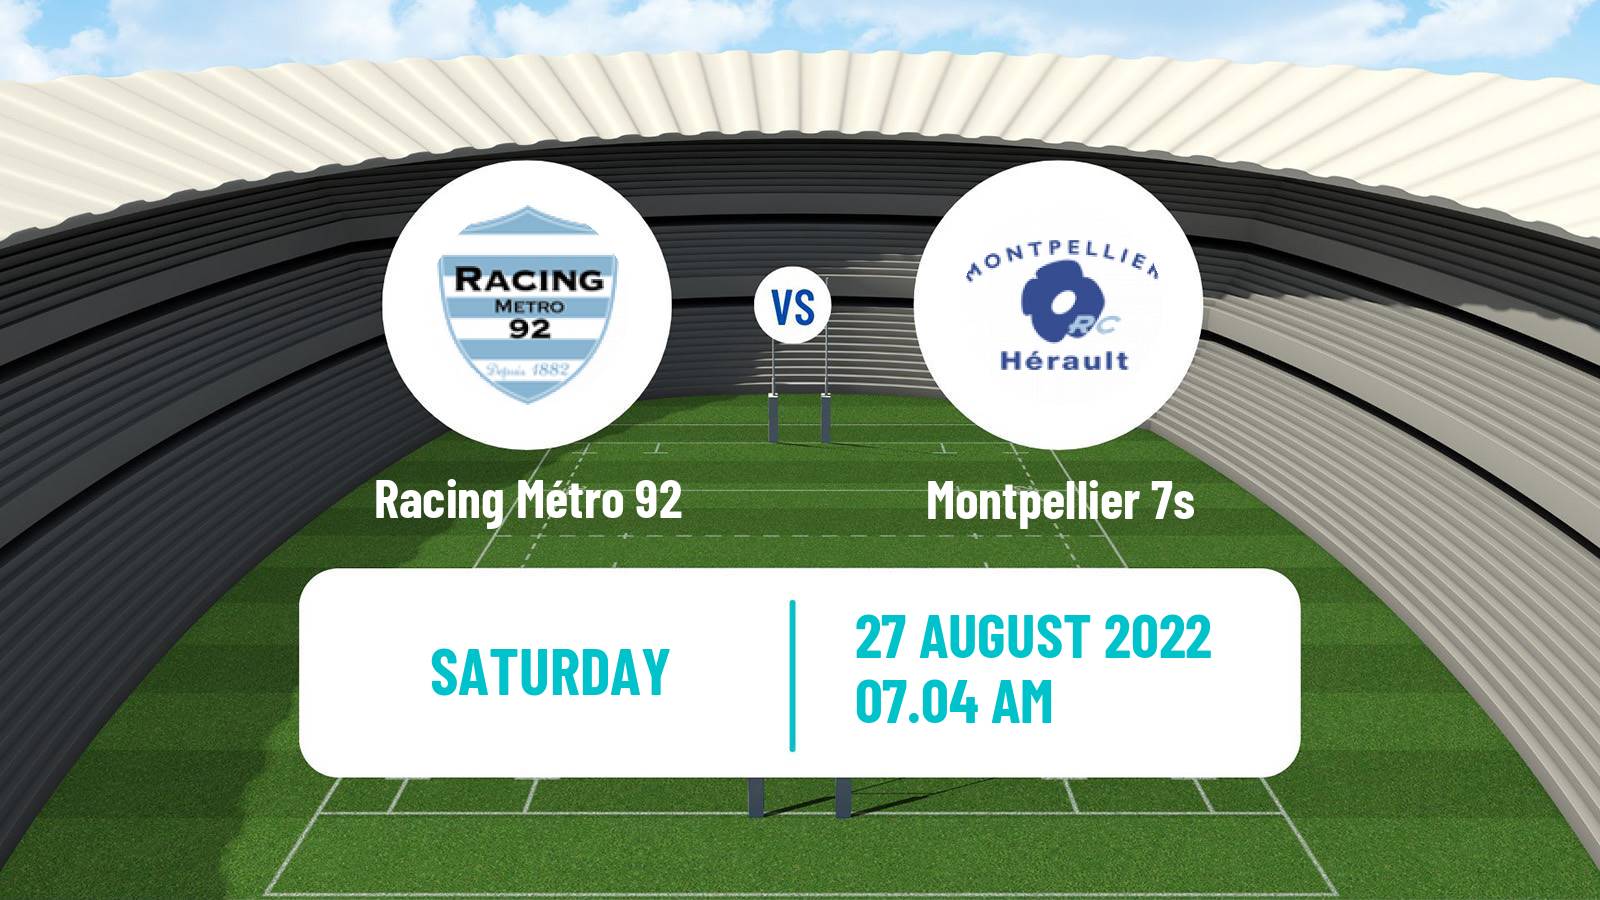 Rugby union French Supersevens 3 Racing Métro 92 - Montpellier 7s